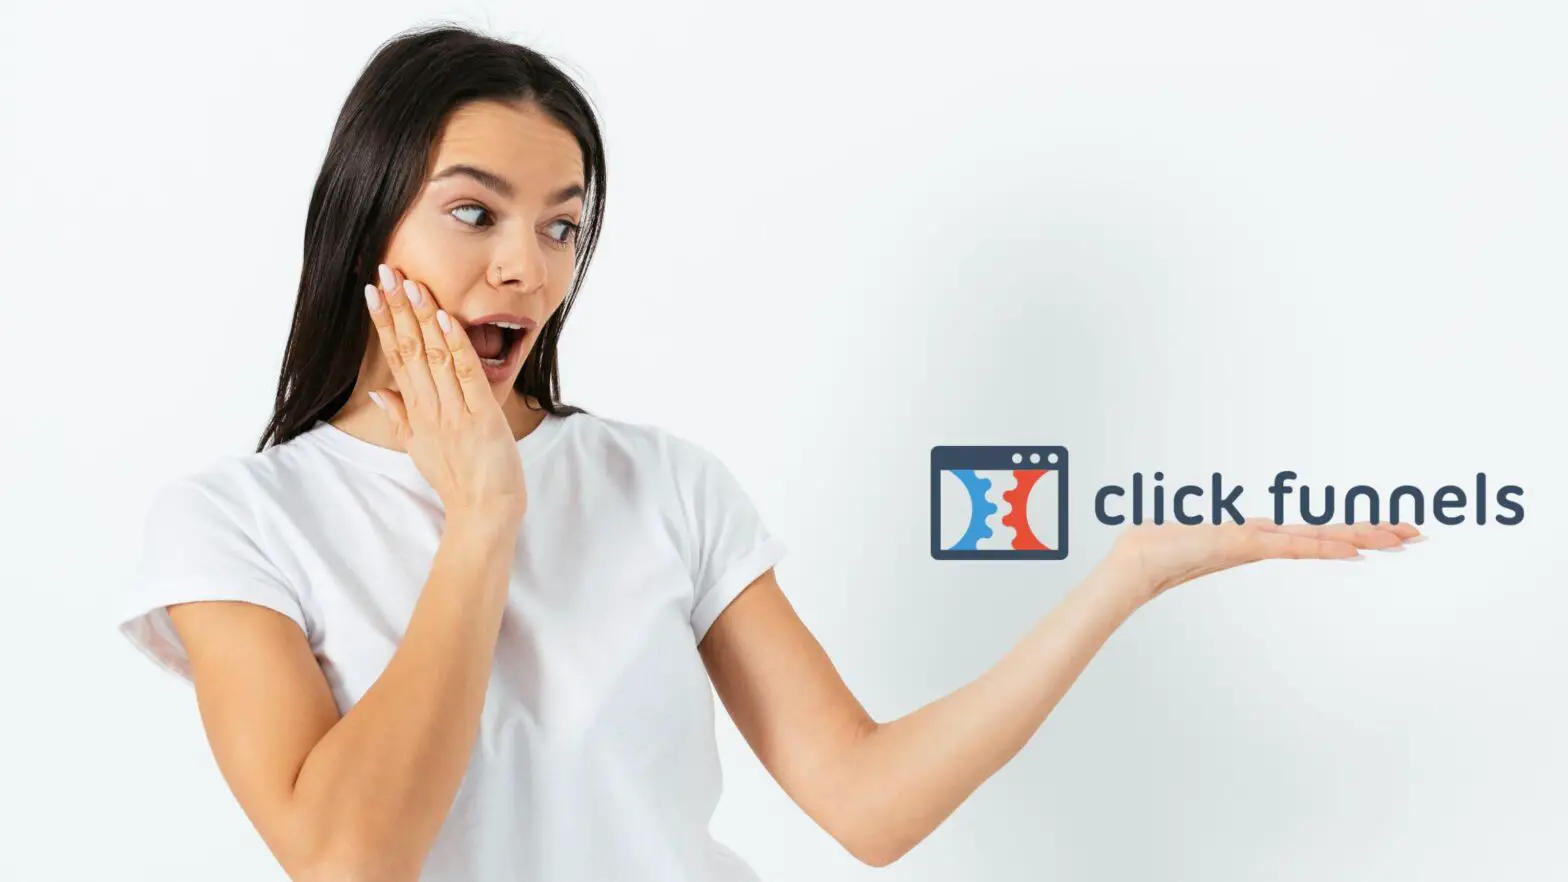 ClickFunnels 2.0 Review (Is It Worth It?)